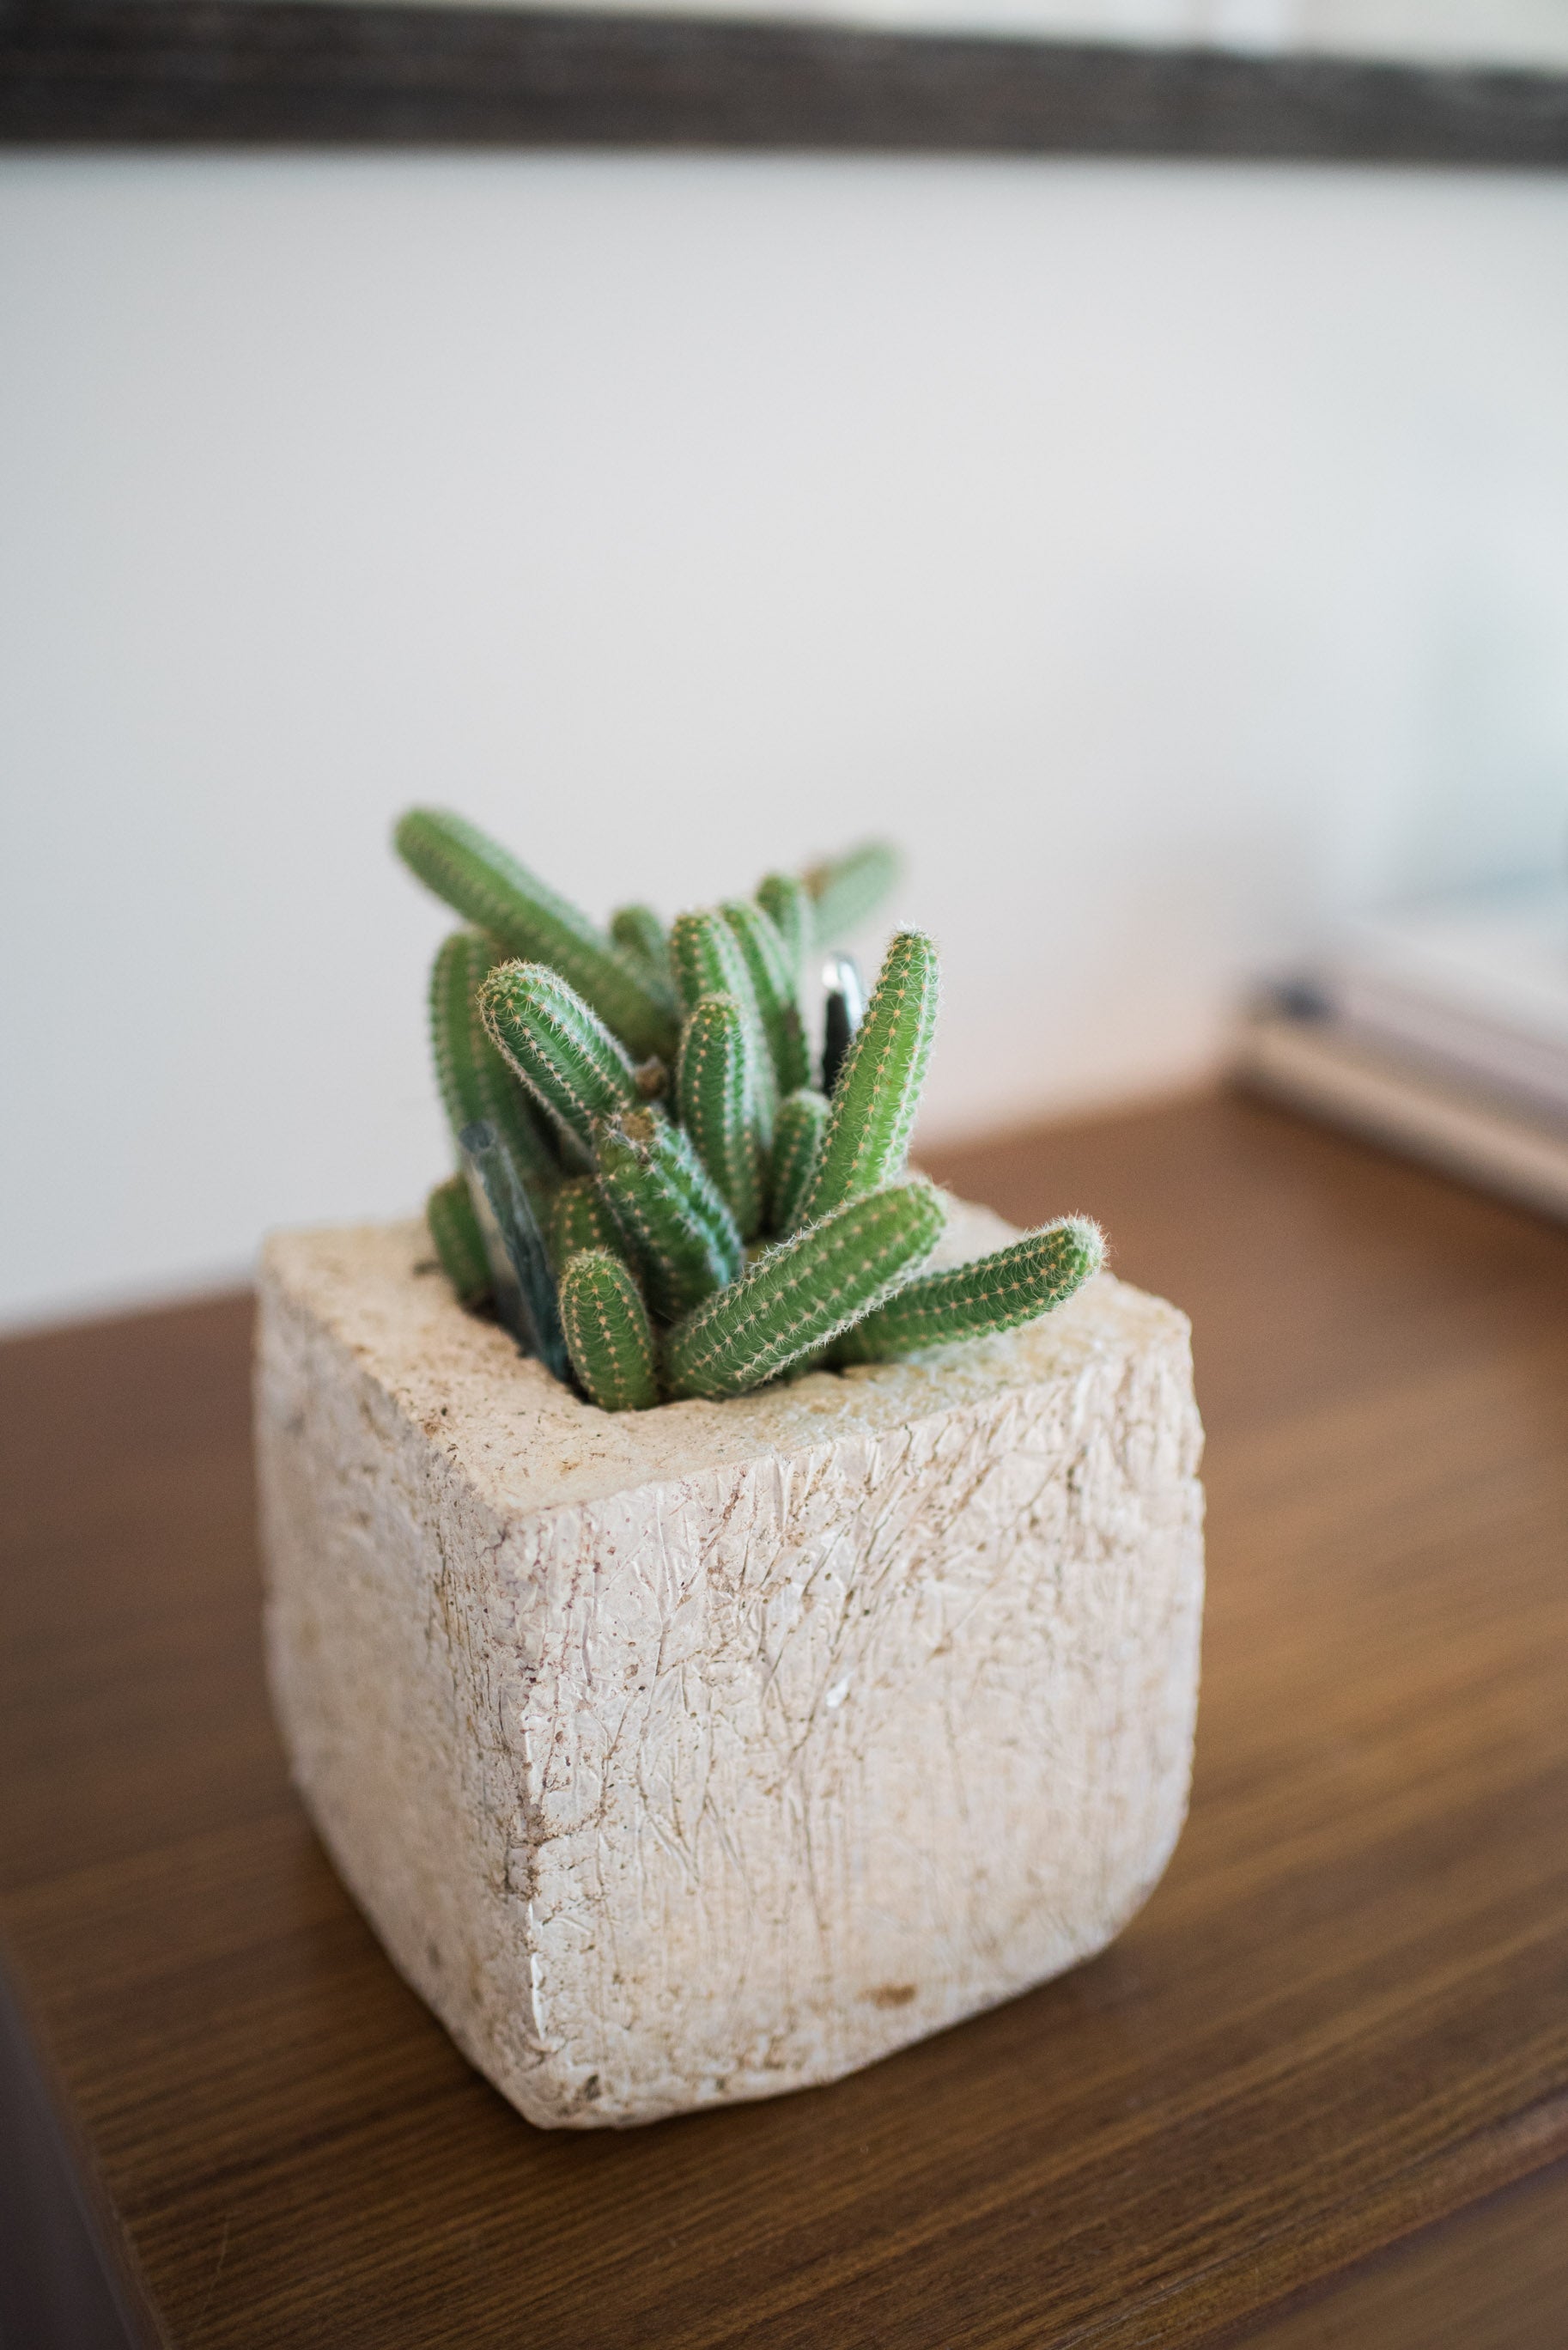 Made from our handmade Pozzola pottery. This modern bespoke living tablescape comes in a bone color and is planted with a seasonal variety of echeveria succulents. One organically shaped square, fits in the palm of both hands and has the feel and texture of washed stone but is ultra light weight. It brings style to any room and surface, inside or out.